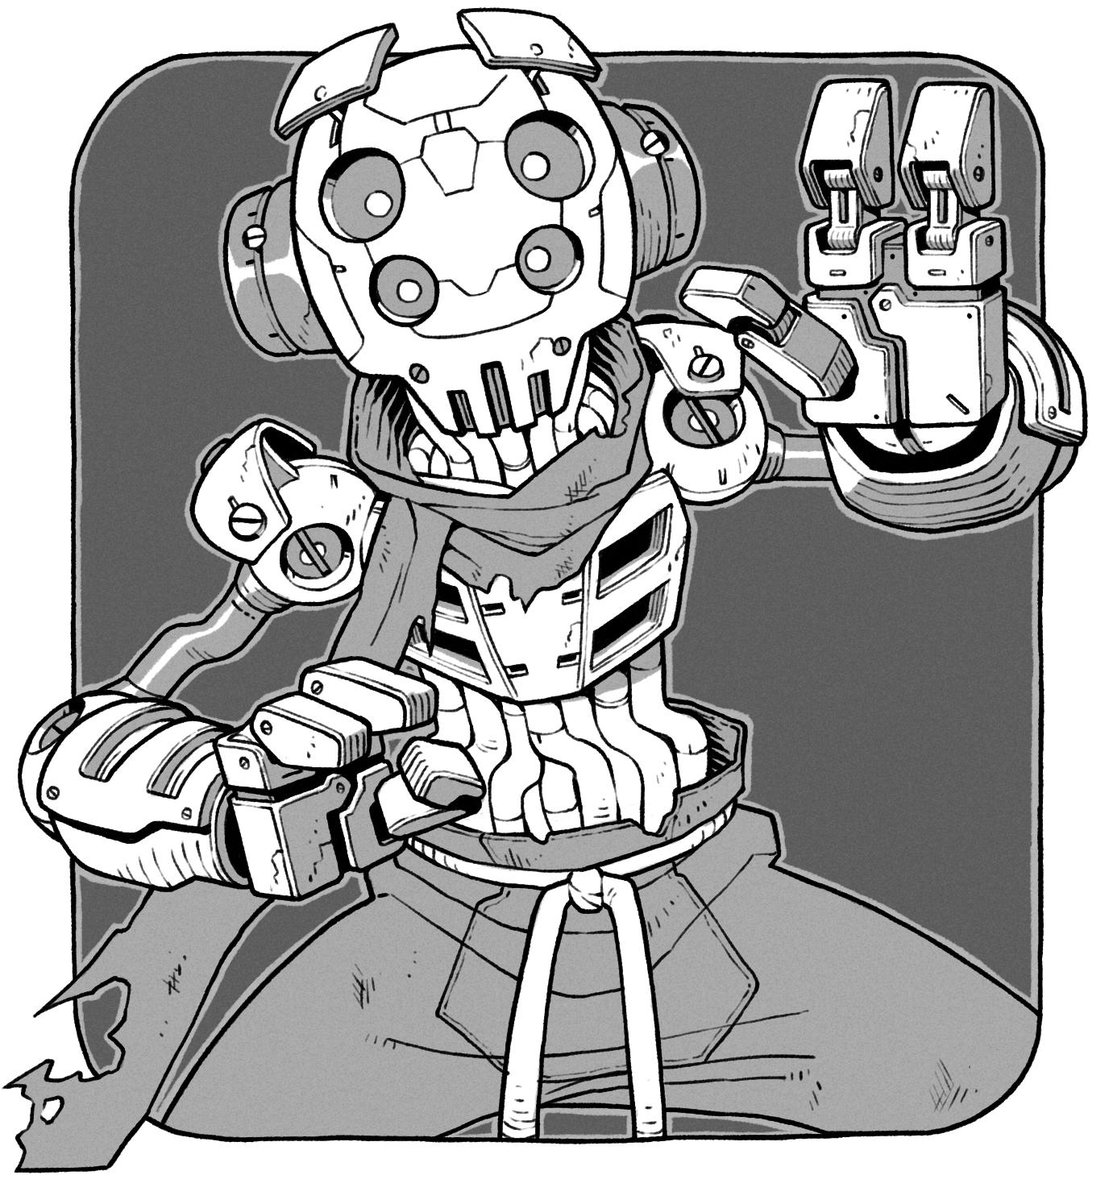 Next one! This one is @Shnikkles little robot character! 